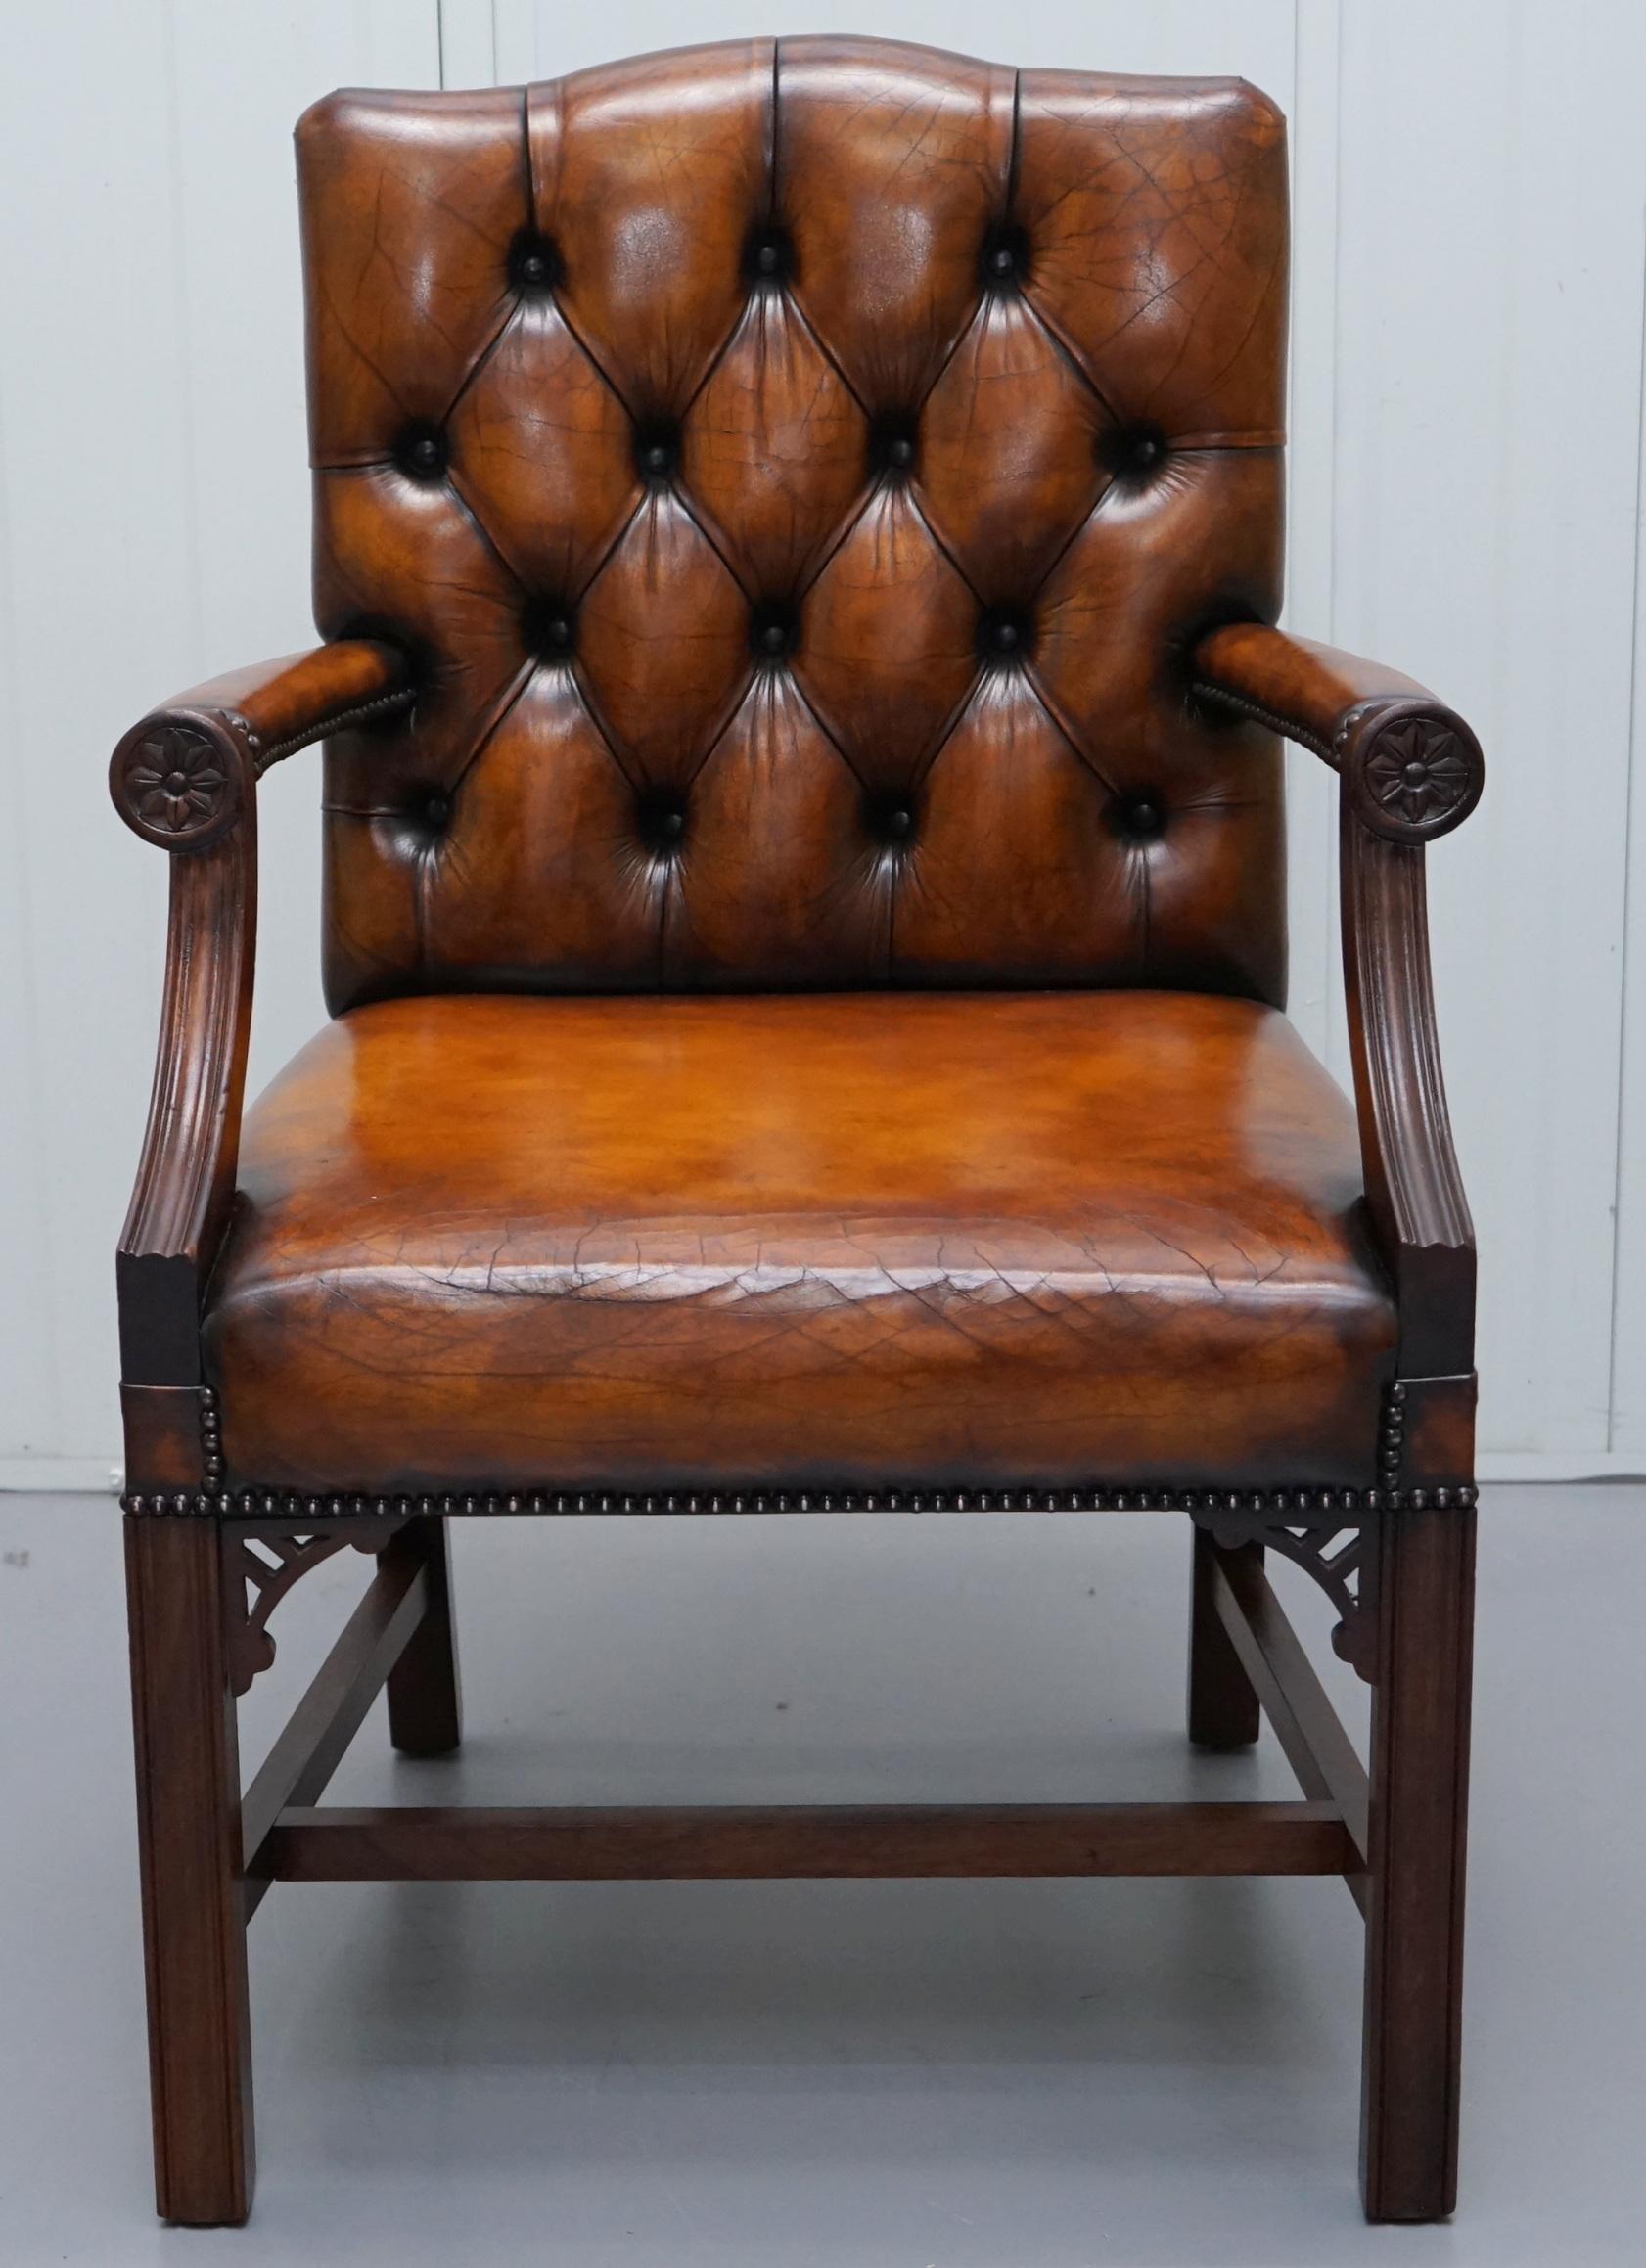 We are delighted to offer for sale this stunning vintage fully restored hand dyed aged brown leather Gainsborough carver armchair with Thomas Chippendale style fret work carving

A very good looking and well made armchair, there are allot of